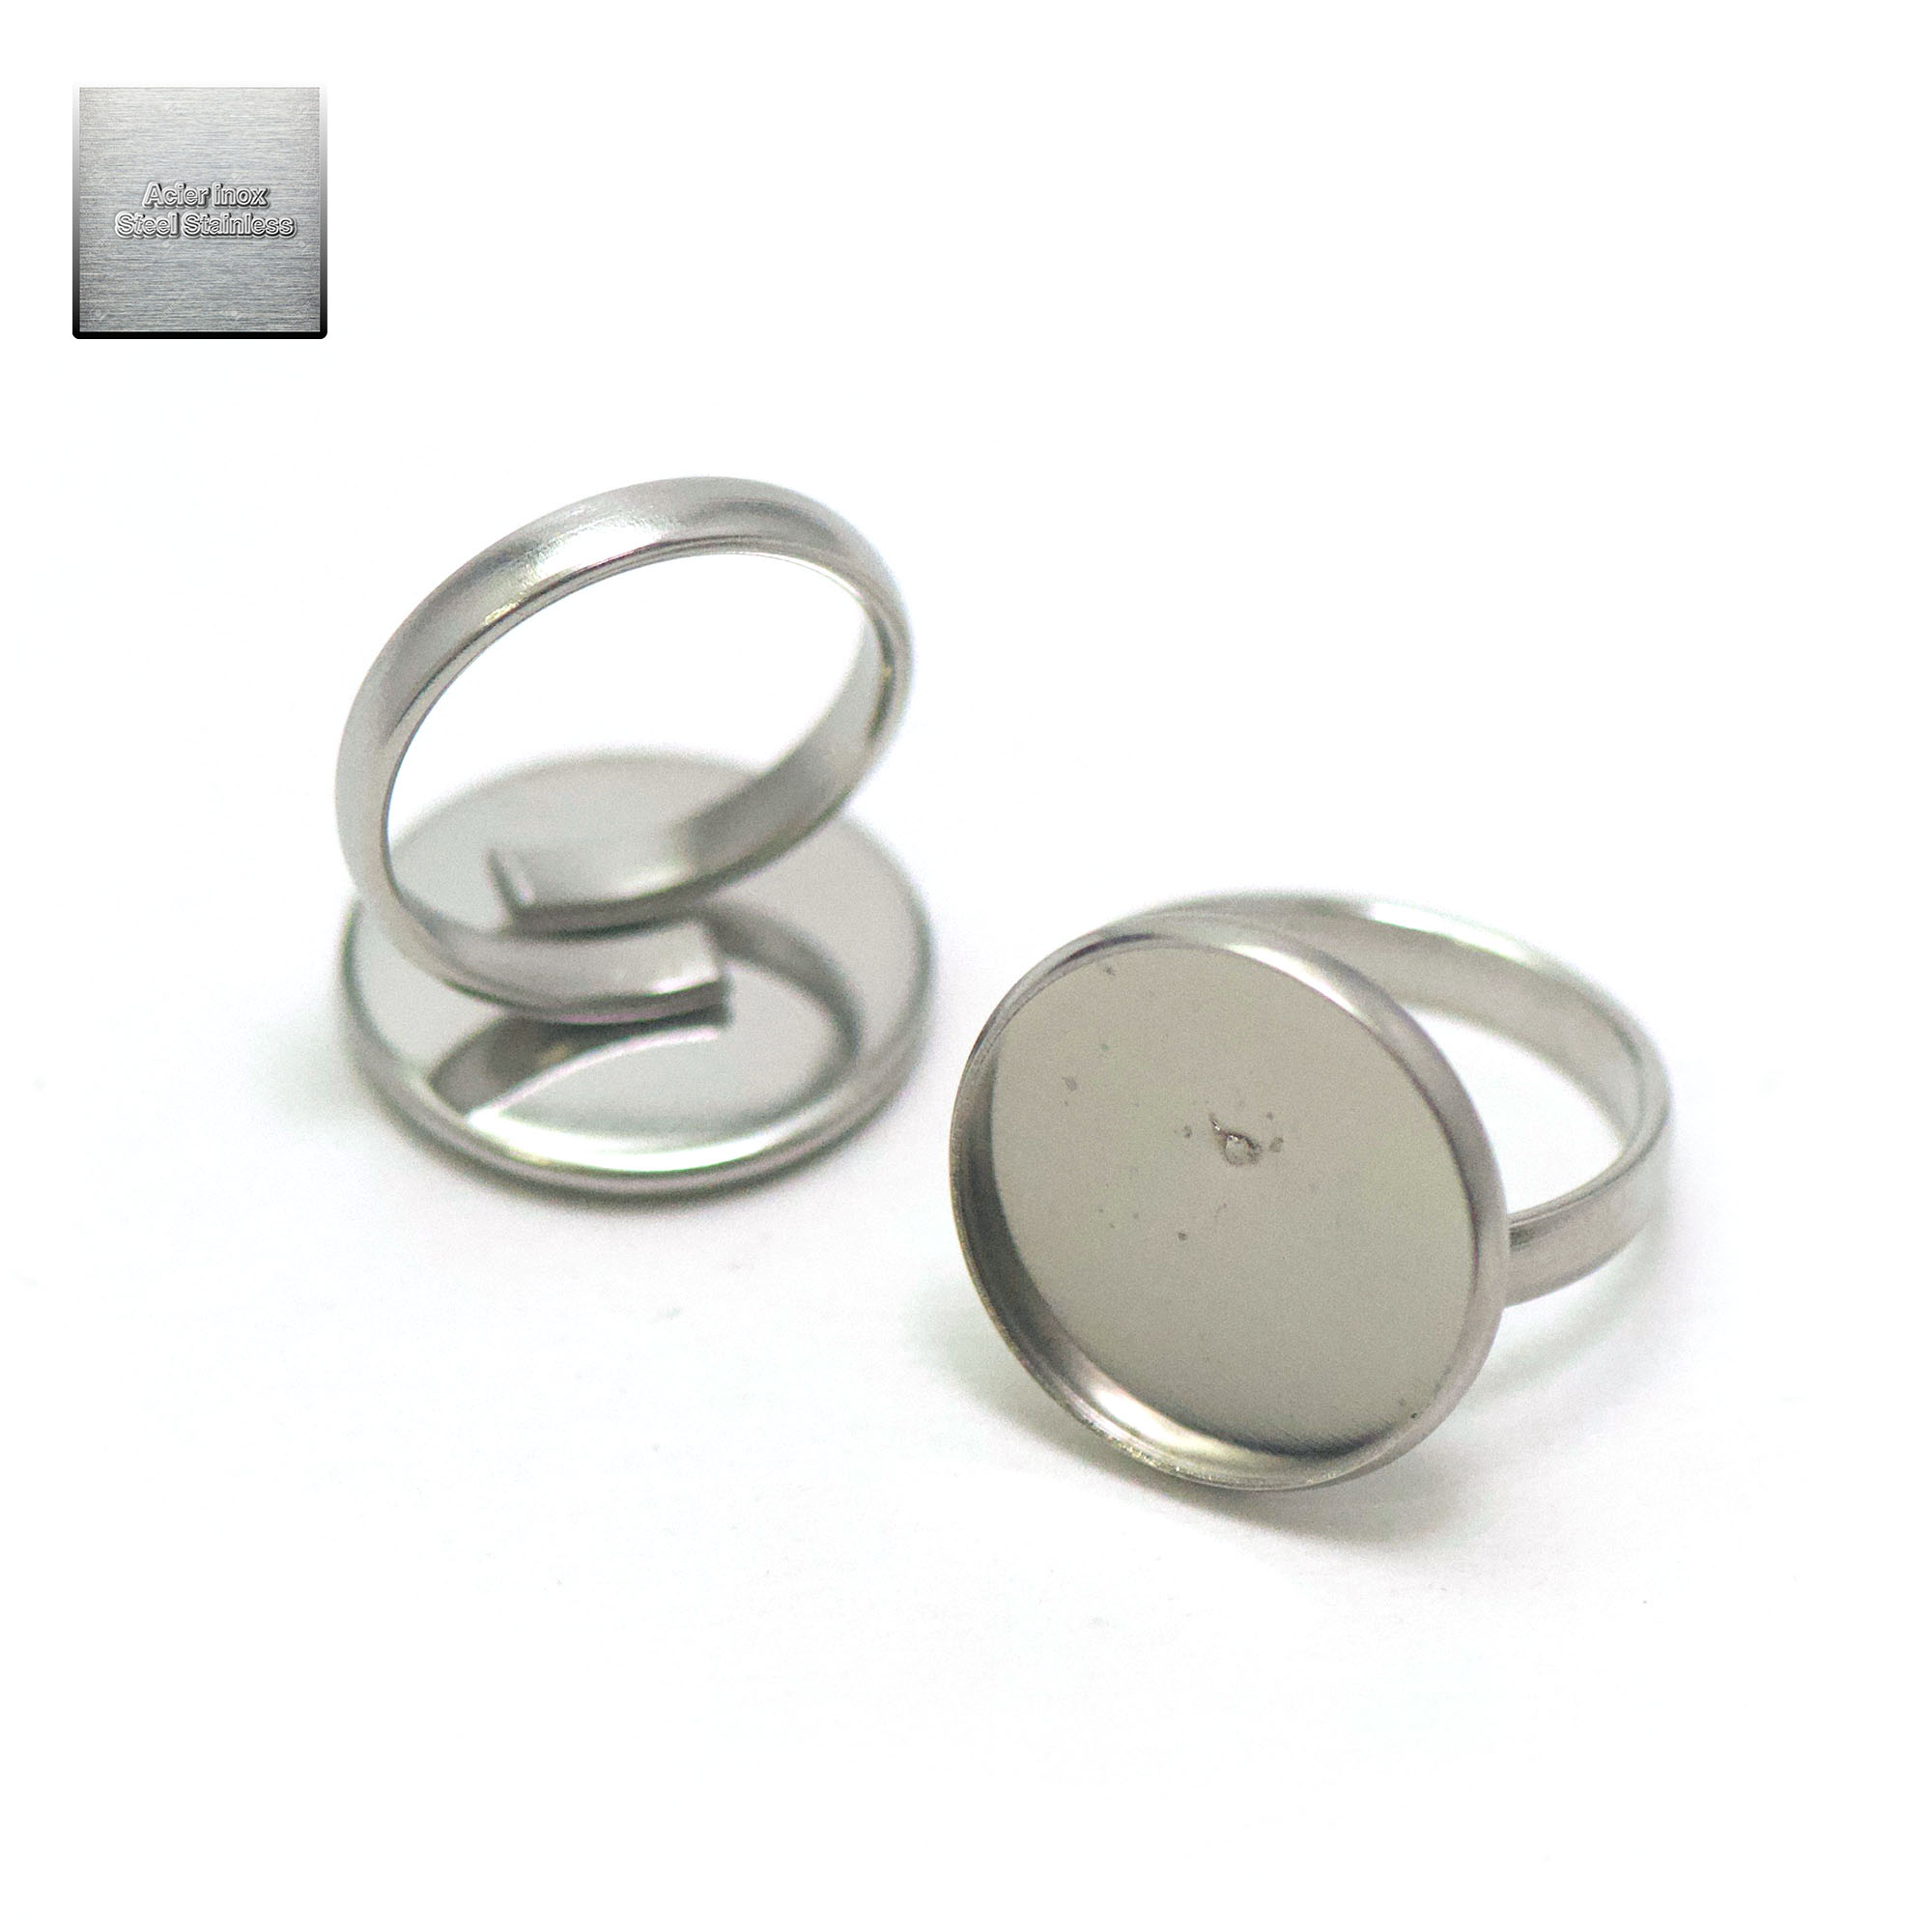 Acier inox: 2 bagues support cabochon ronde 16 mm, steel stainless